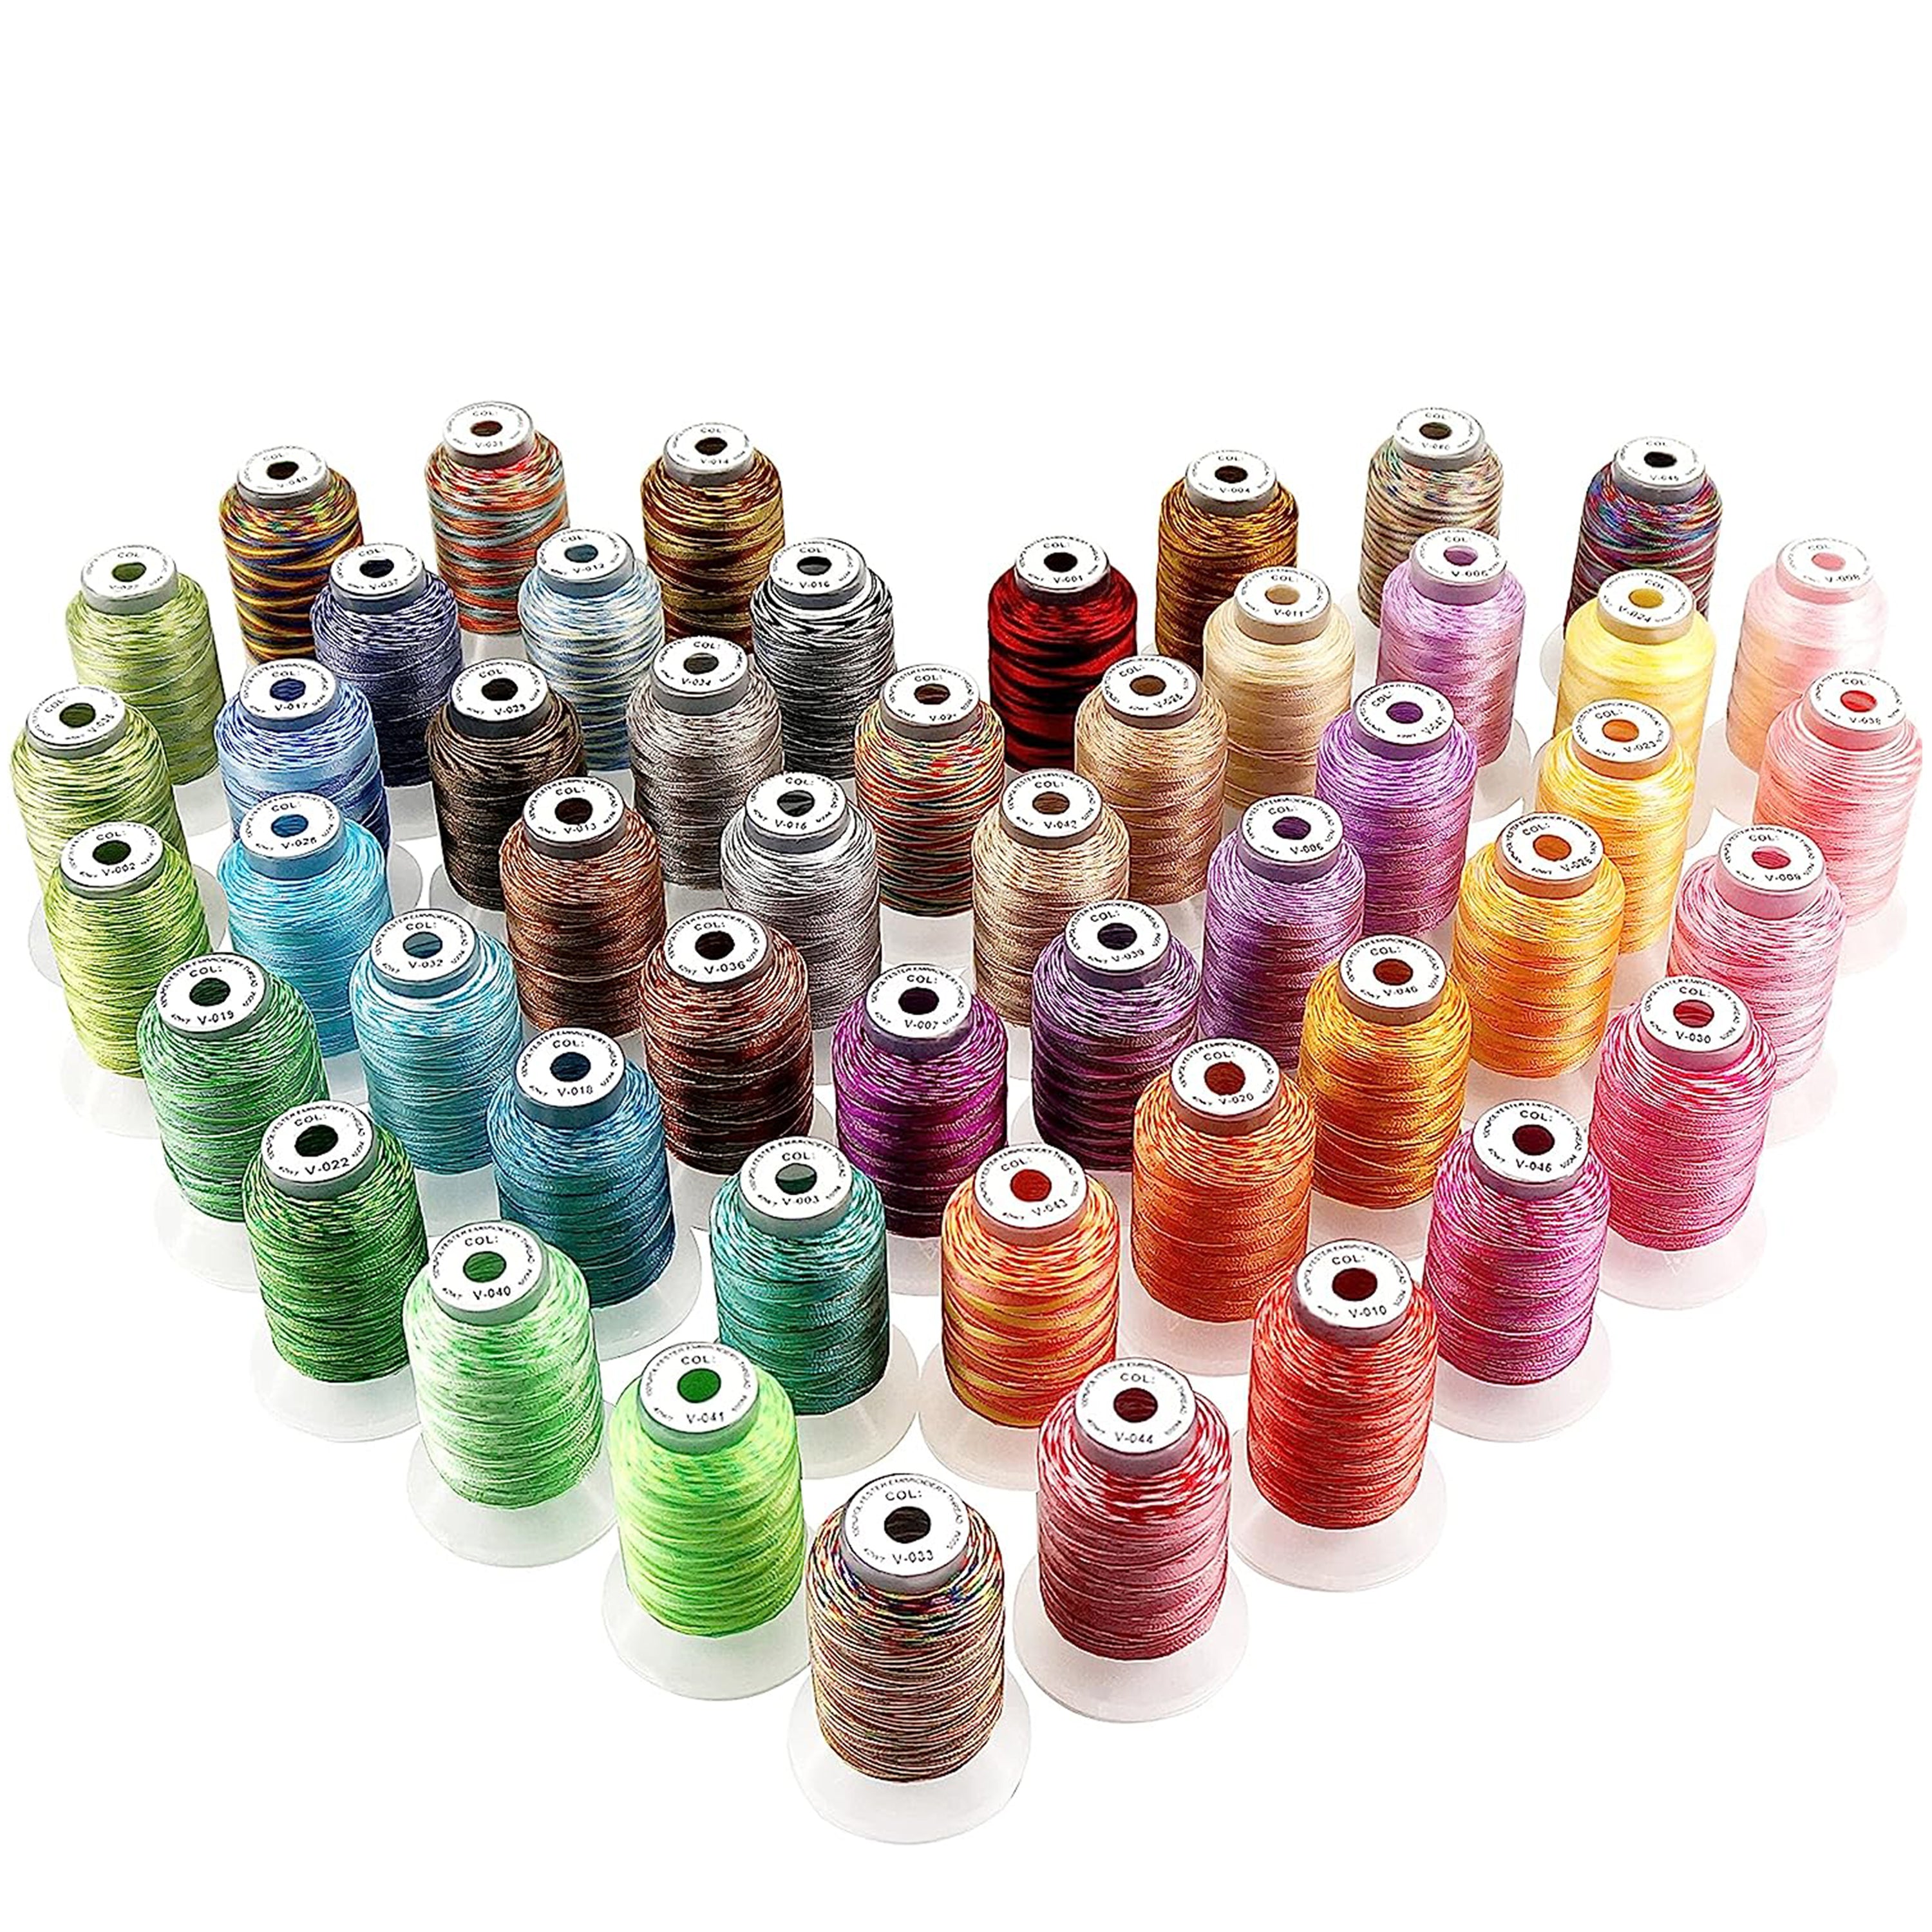 New Brothread 50 Colors Variegated Polyester Embroidery Machine Thread